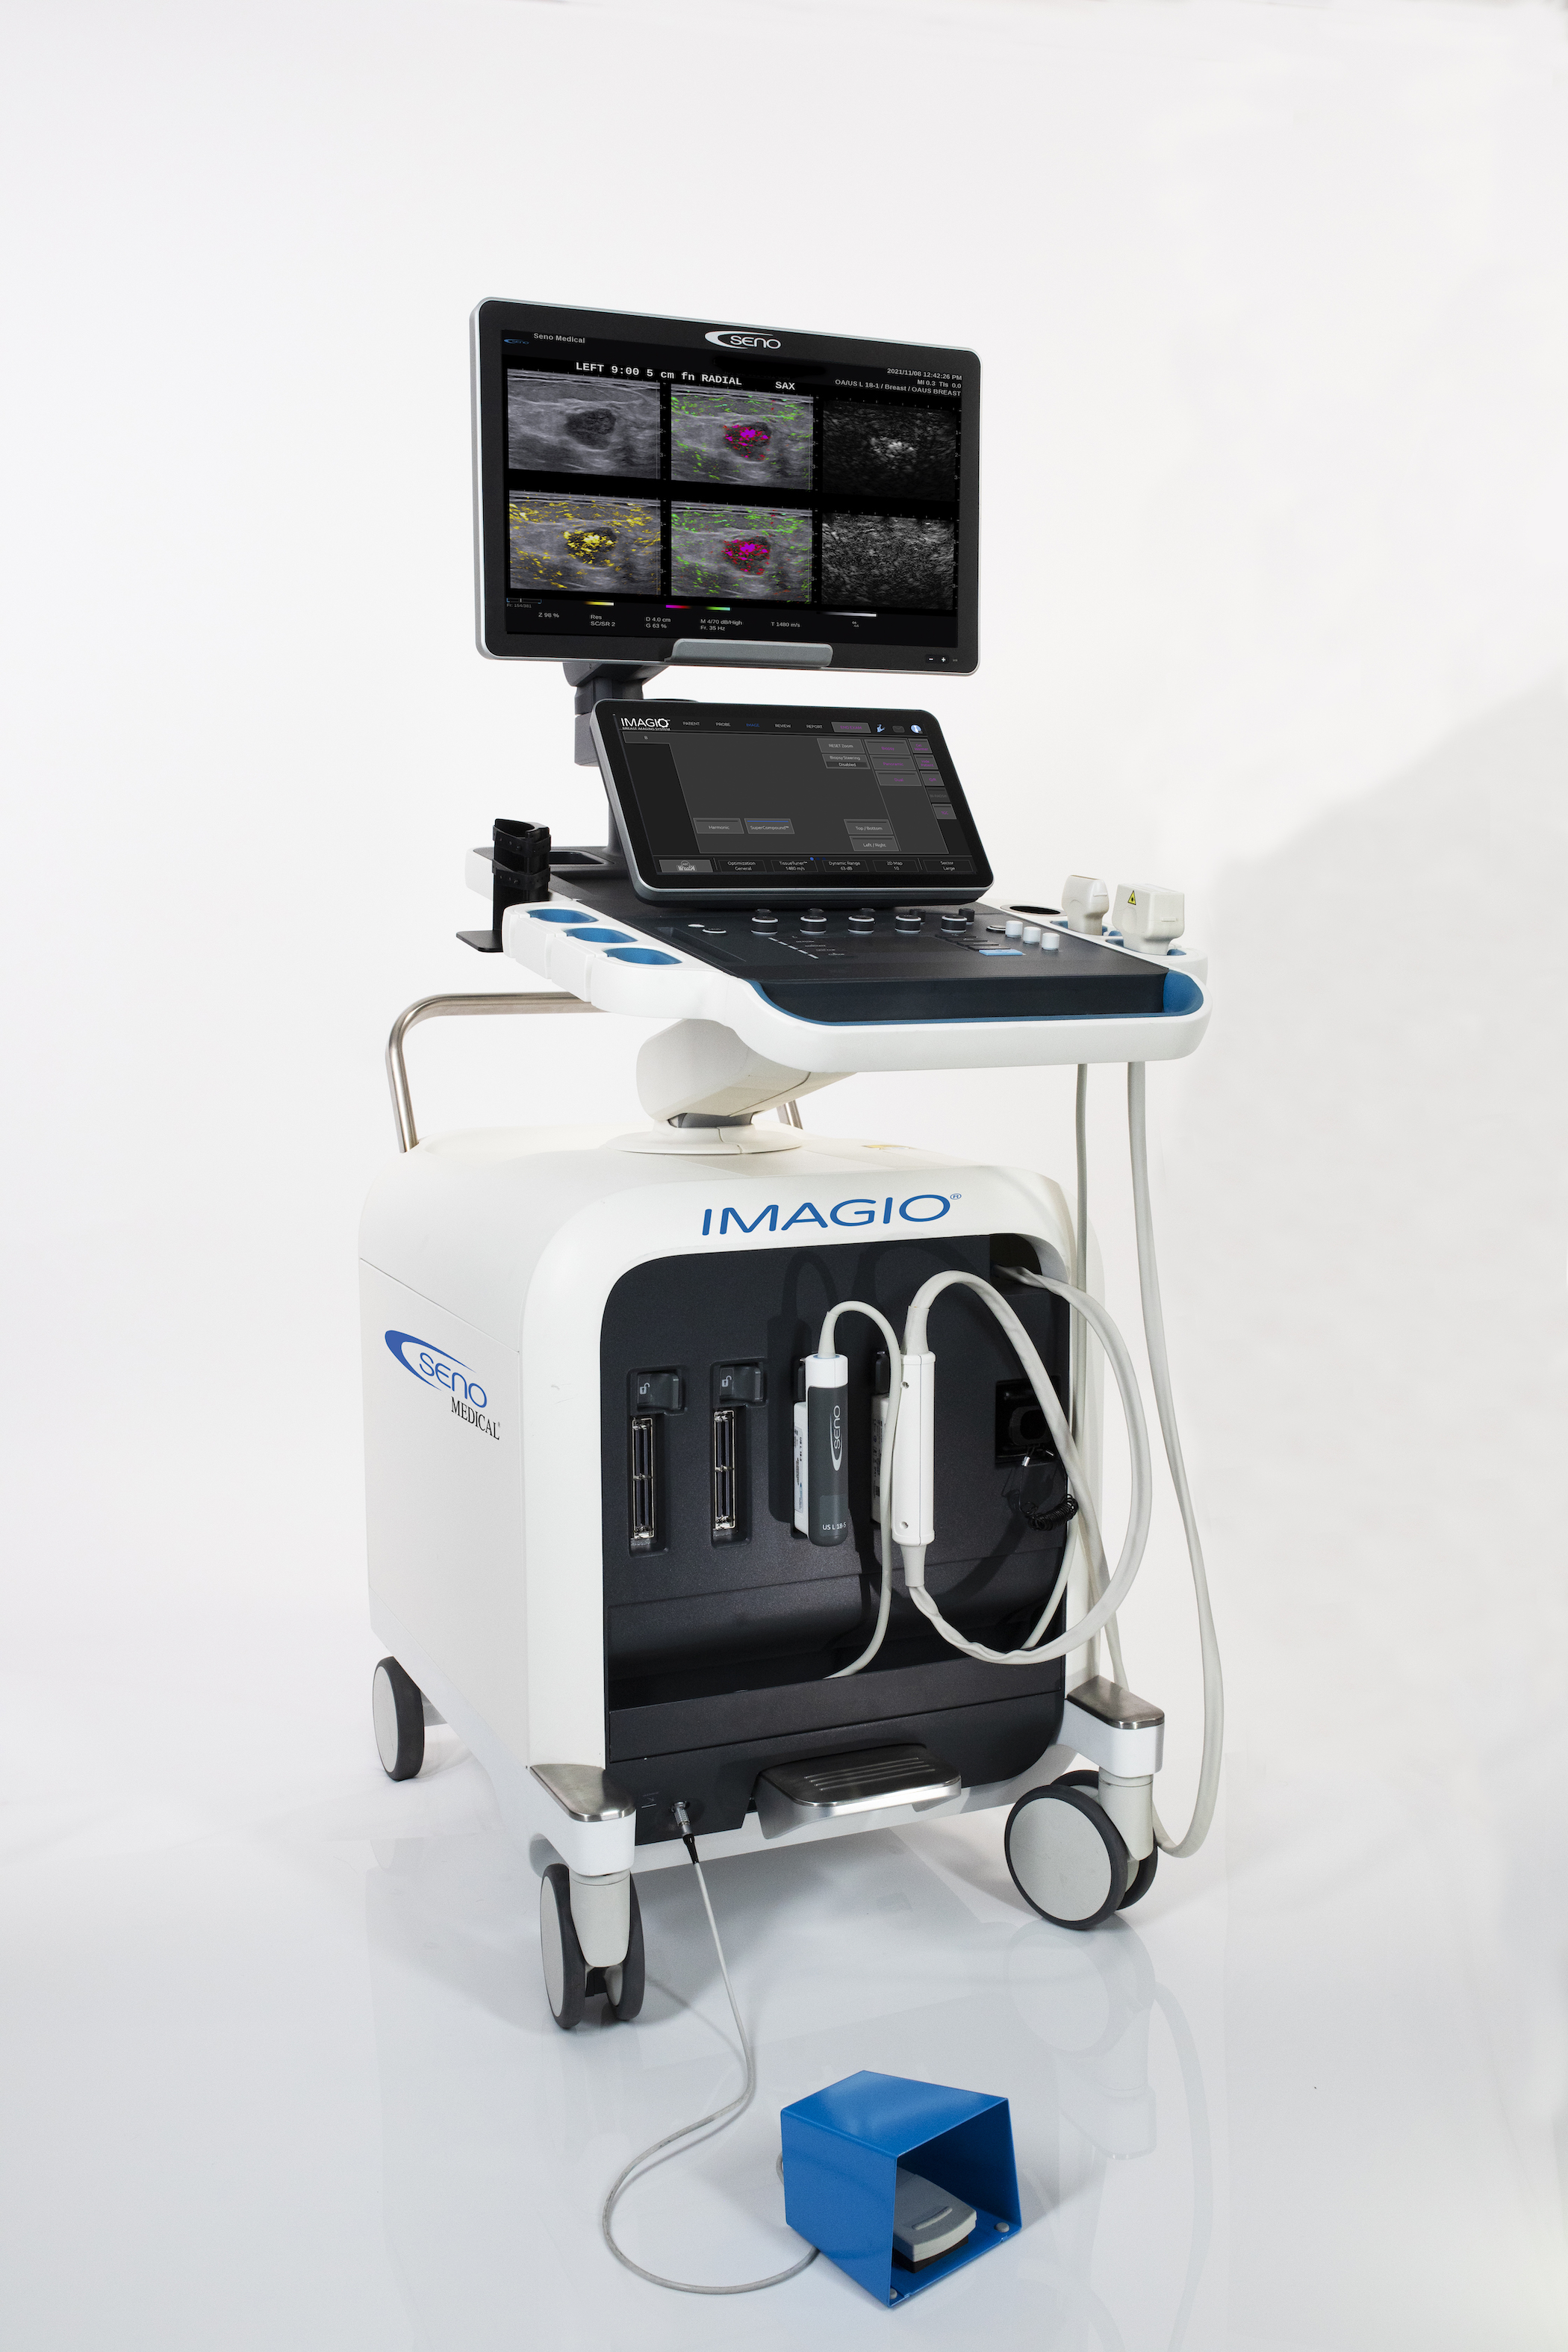 Imagio® OA/US technology combines laser optics, sound, and artificial intelligence to offer functional and anatomical breast imaging. The opto-acoustic images provide a unique blood map in and around breast masses, while the ultrasound provides a traditional anatomical image. Through the appearance or absence of two hallmark indicators of cancer — angiogenesis and deoxygenation — the Imagio® OA/US Breast Imaging System is a more effective tool to help radiologists confirm or rule out malignancy compared with traditional diagnostic imaging modalities. And it does this without exposing patients to potentially harmful ionizing radiation (X-rays) or contrast agents.